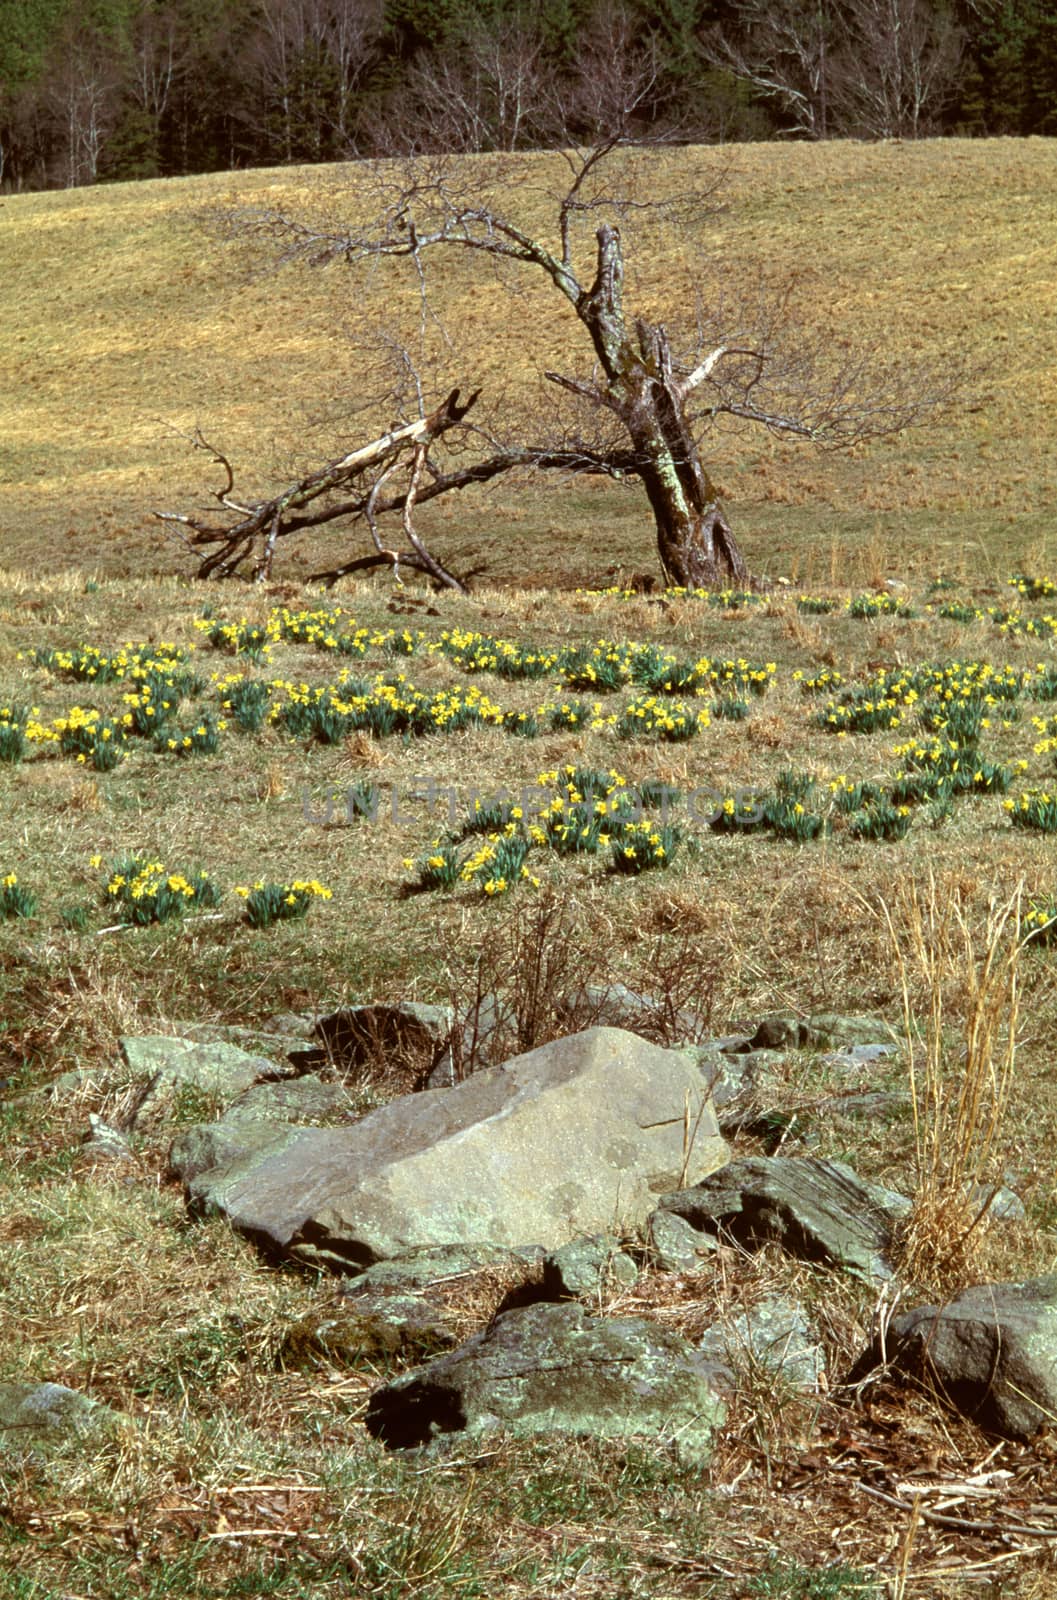 Field of day flowers and dead tree